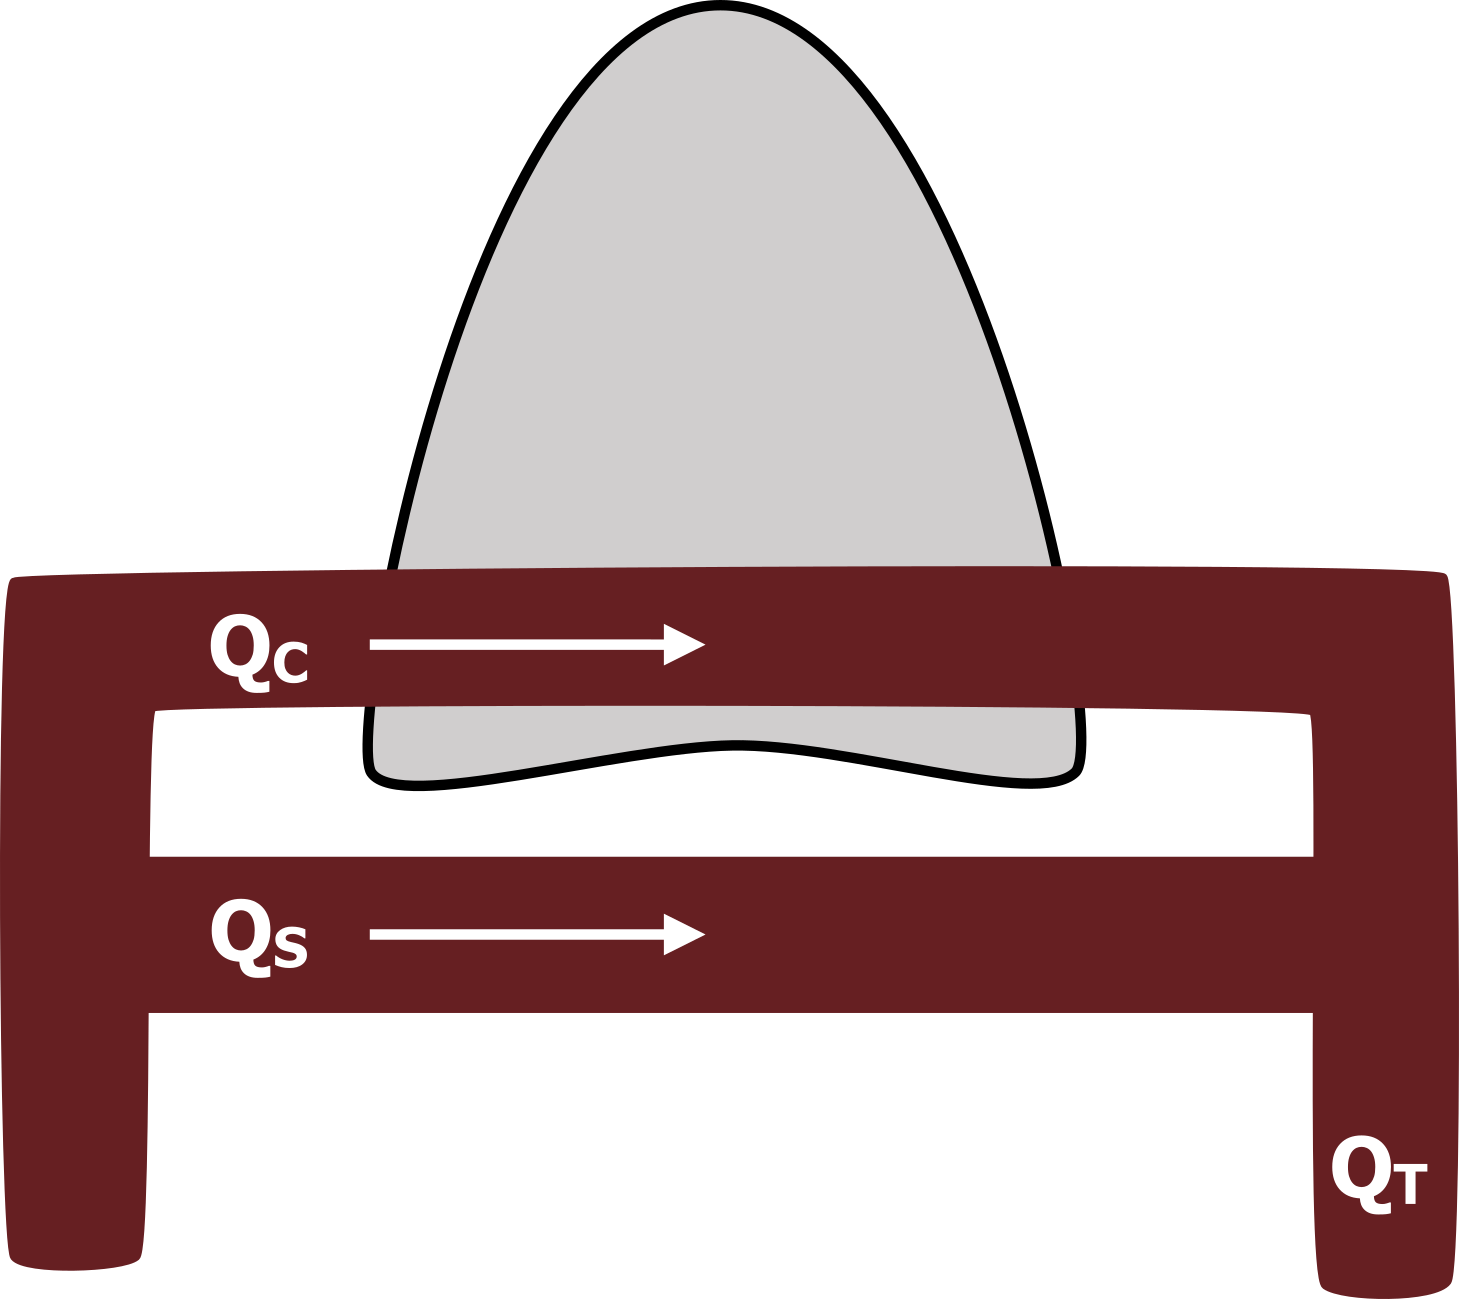 Image of a lung in the background. Two horizontal rectangles connected at both ends with vertical rectangles. Top horizontal rectangle: QC right arrow. Bottom horizontal rectangle: QS right arrow. Right vertical rectangle: QT